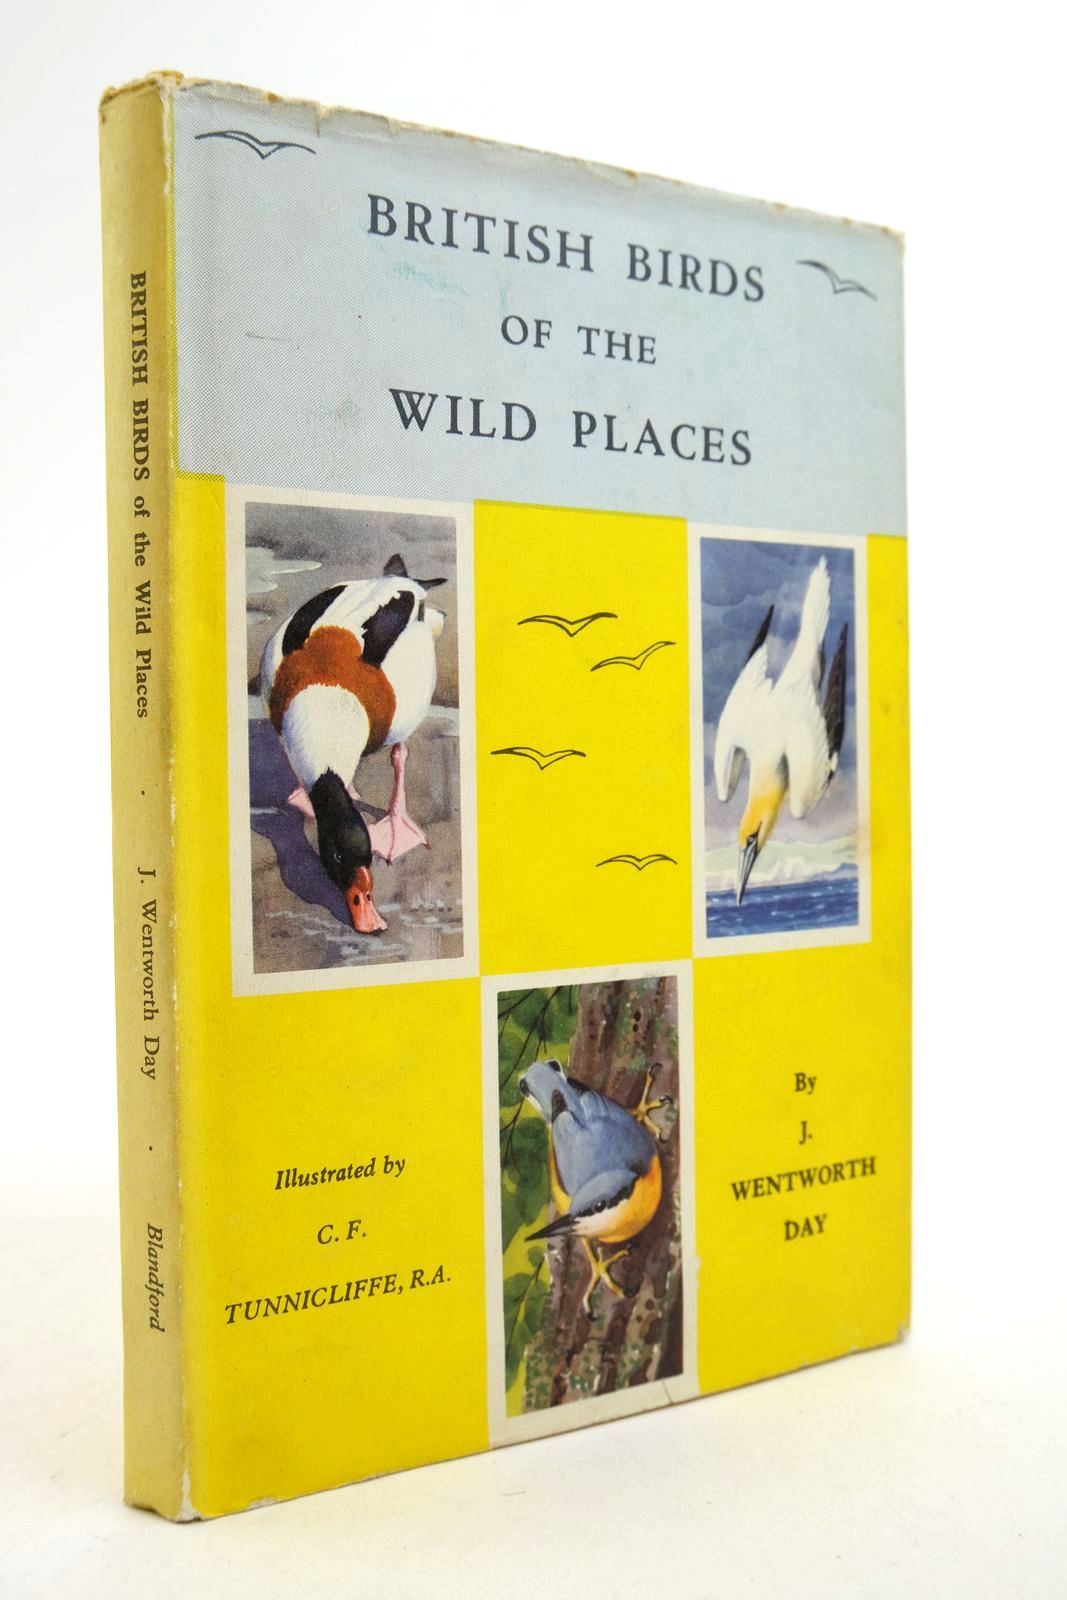 Photo of BRITISH BIRDS OF THE WILD PLACES written by Day, J. Wentworth illustrated by Tunnicliffe, C.F. published by Blandford Press (STOCK CODE: 2140181)  for sale by Stella & Rose's Books